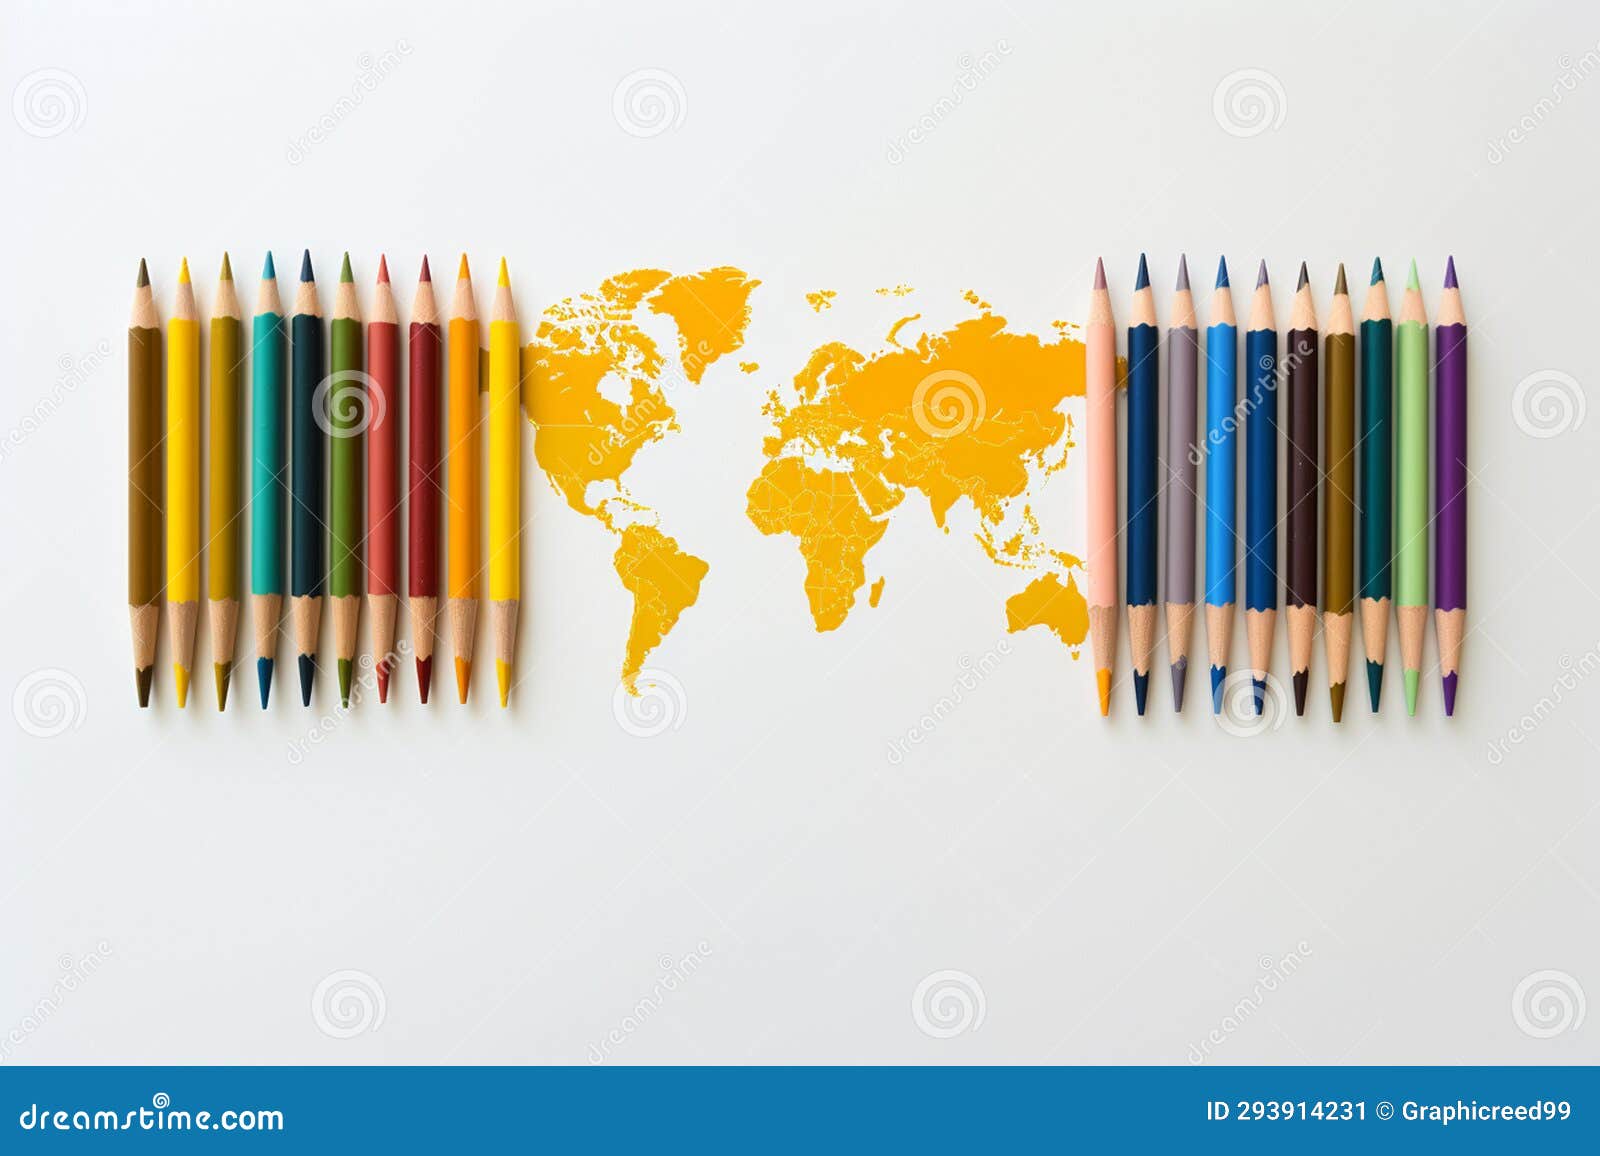 https://thumbs.dreamstime.com/z/experience-world-vibrant-hues-captivating-image-colored-pencils-arranged-shape-map-pristine-white-293914231.jpg